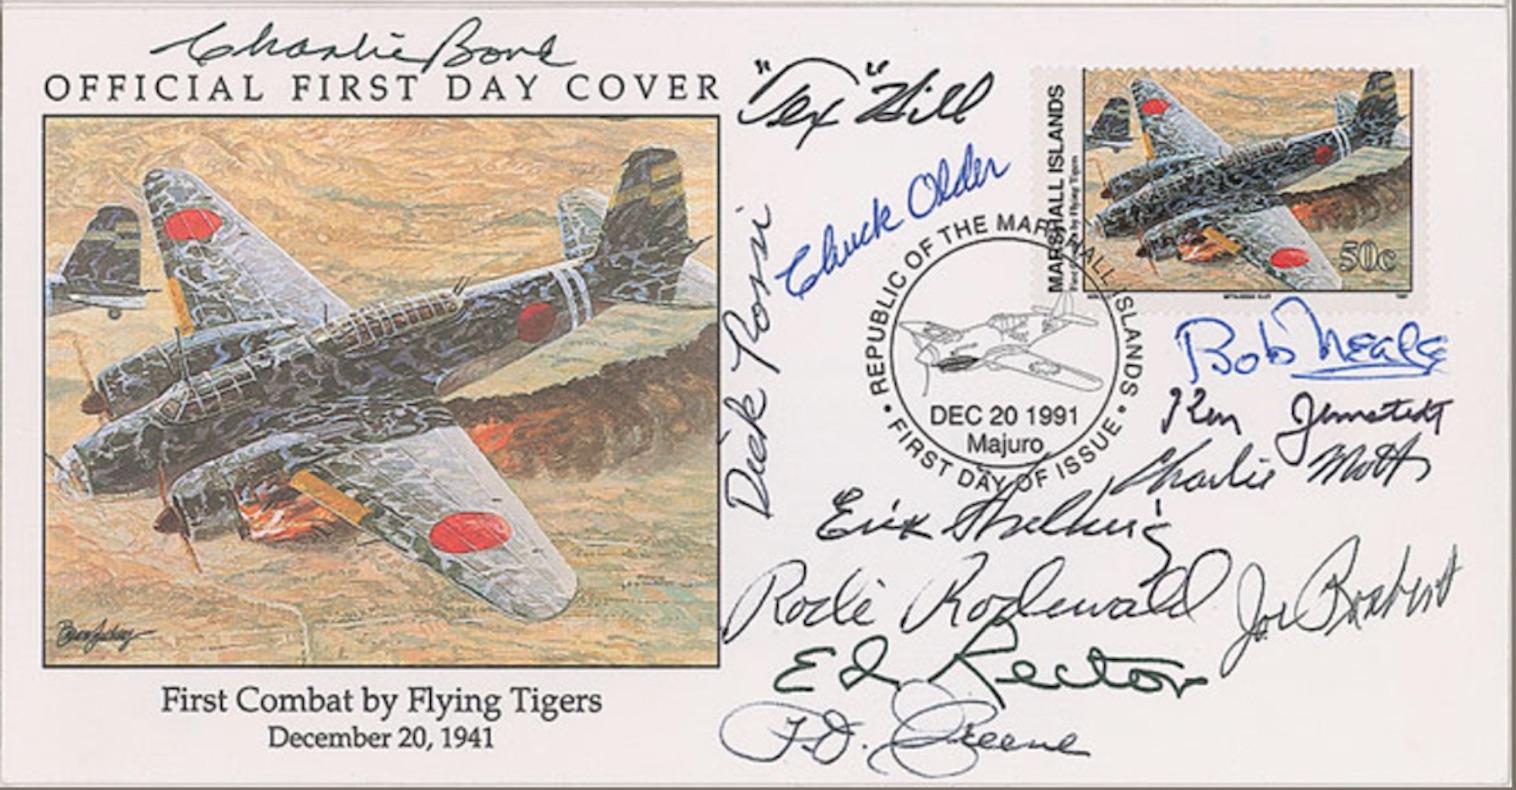 Mid-20th Century WWII Blood Chit and Flying Tigers Autographed Collage